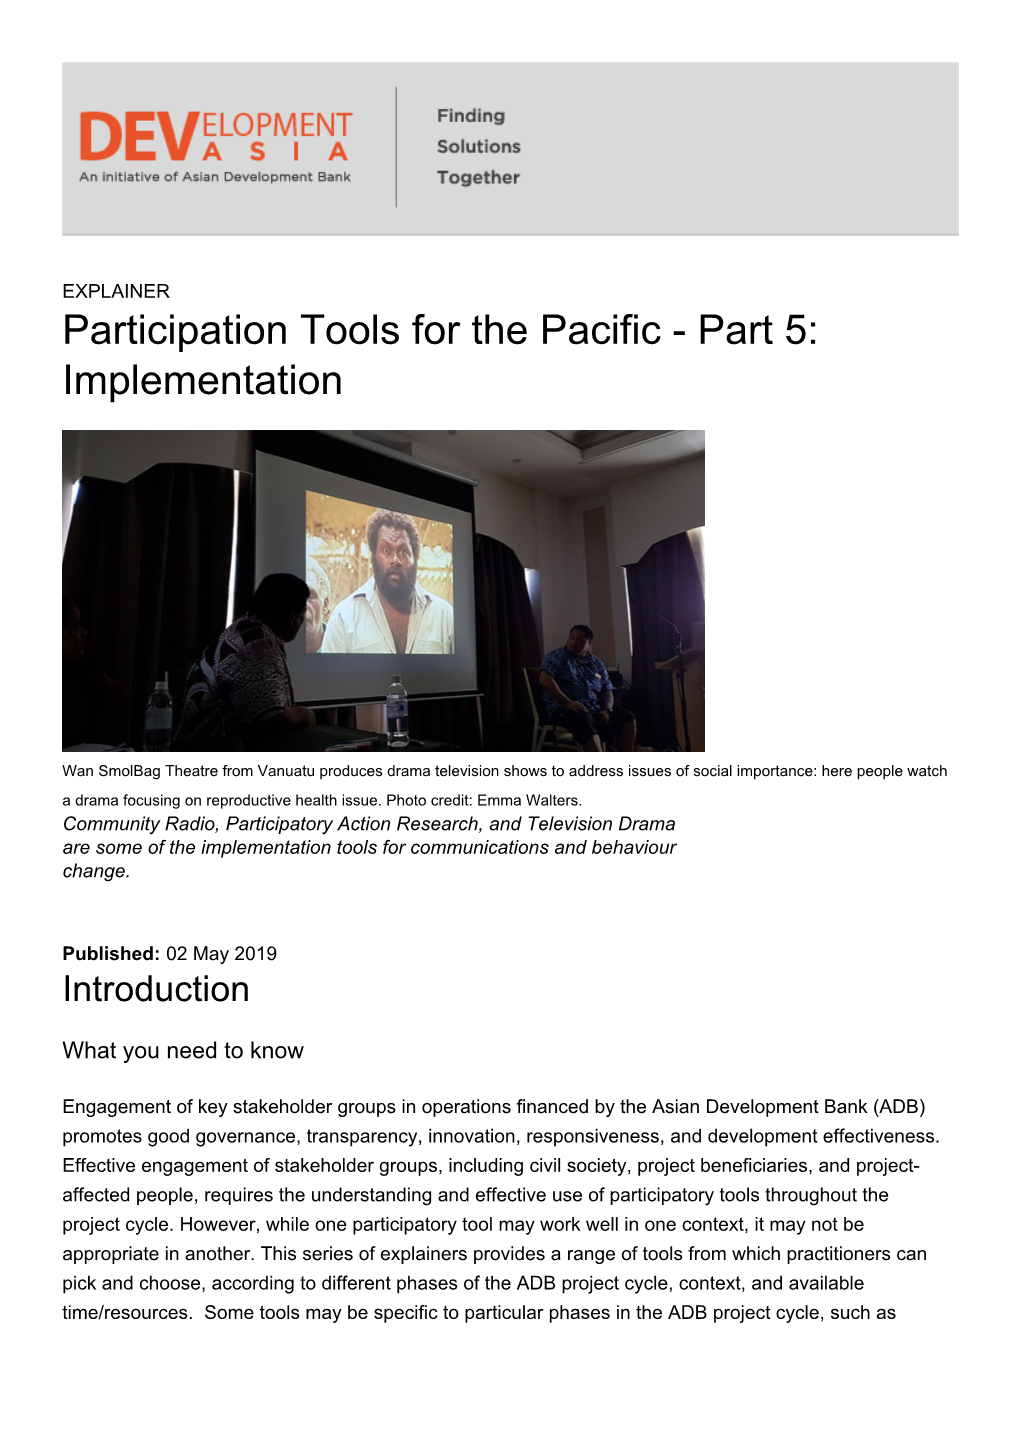 Participation Tools for the Pacific - Part 5: Implementation